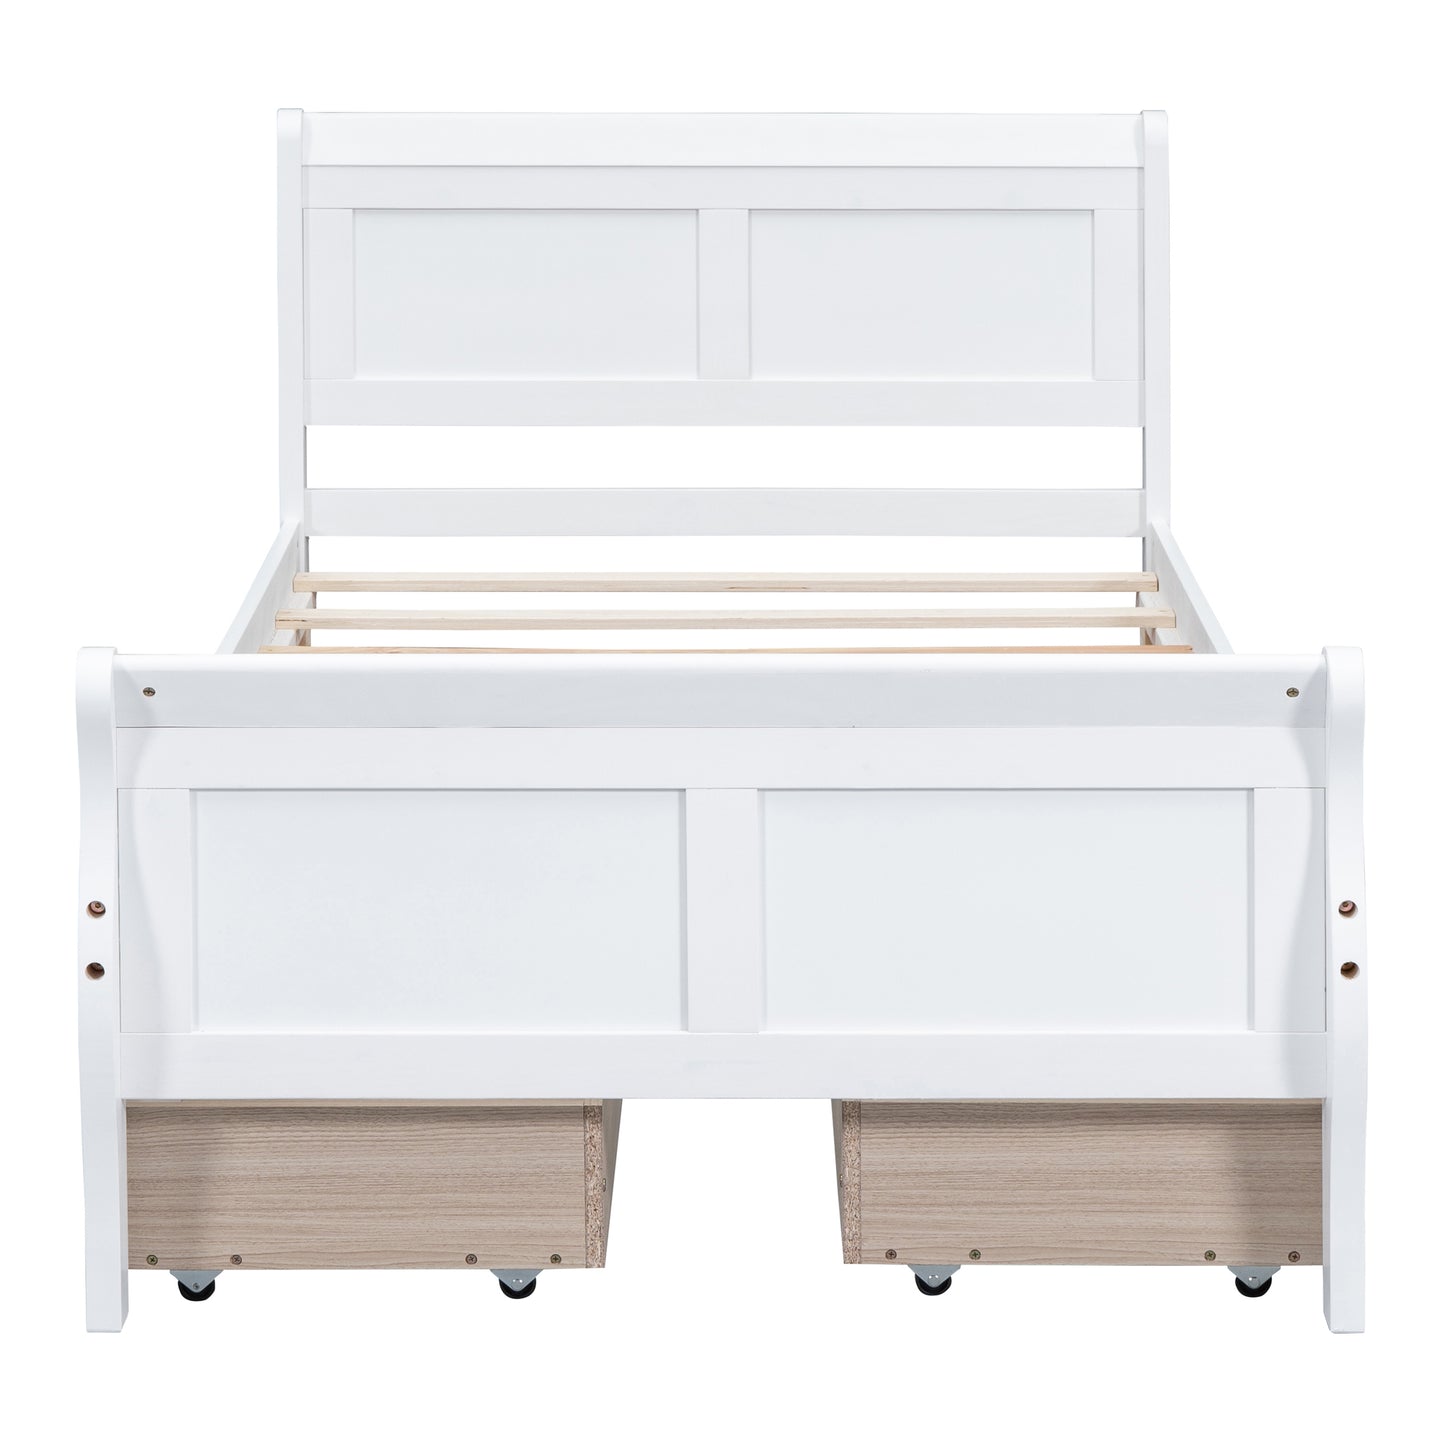 Twin Size Wood Platform Bed with 4 Drawers and Streamlined Headboard & Footboard, White